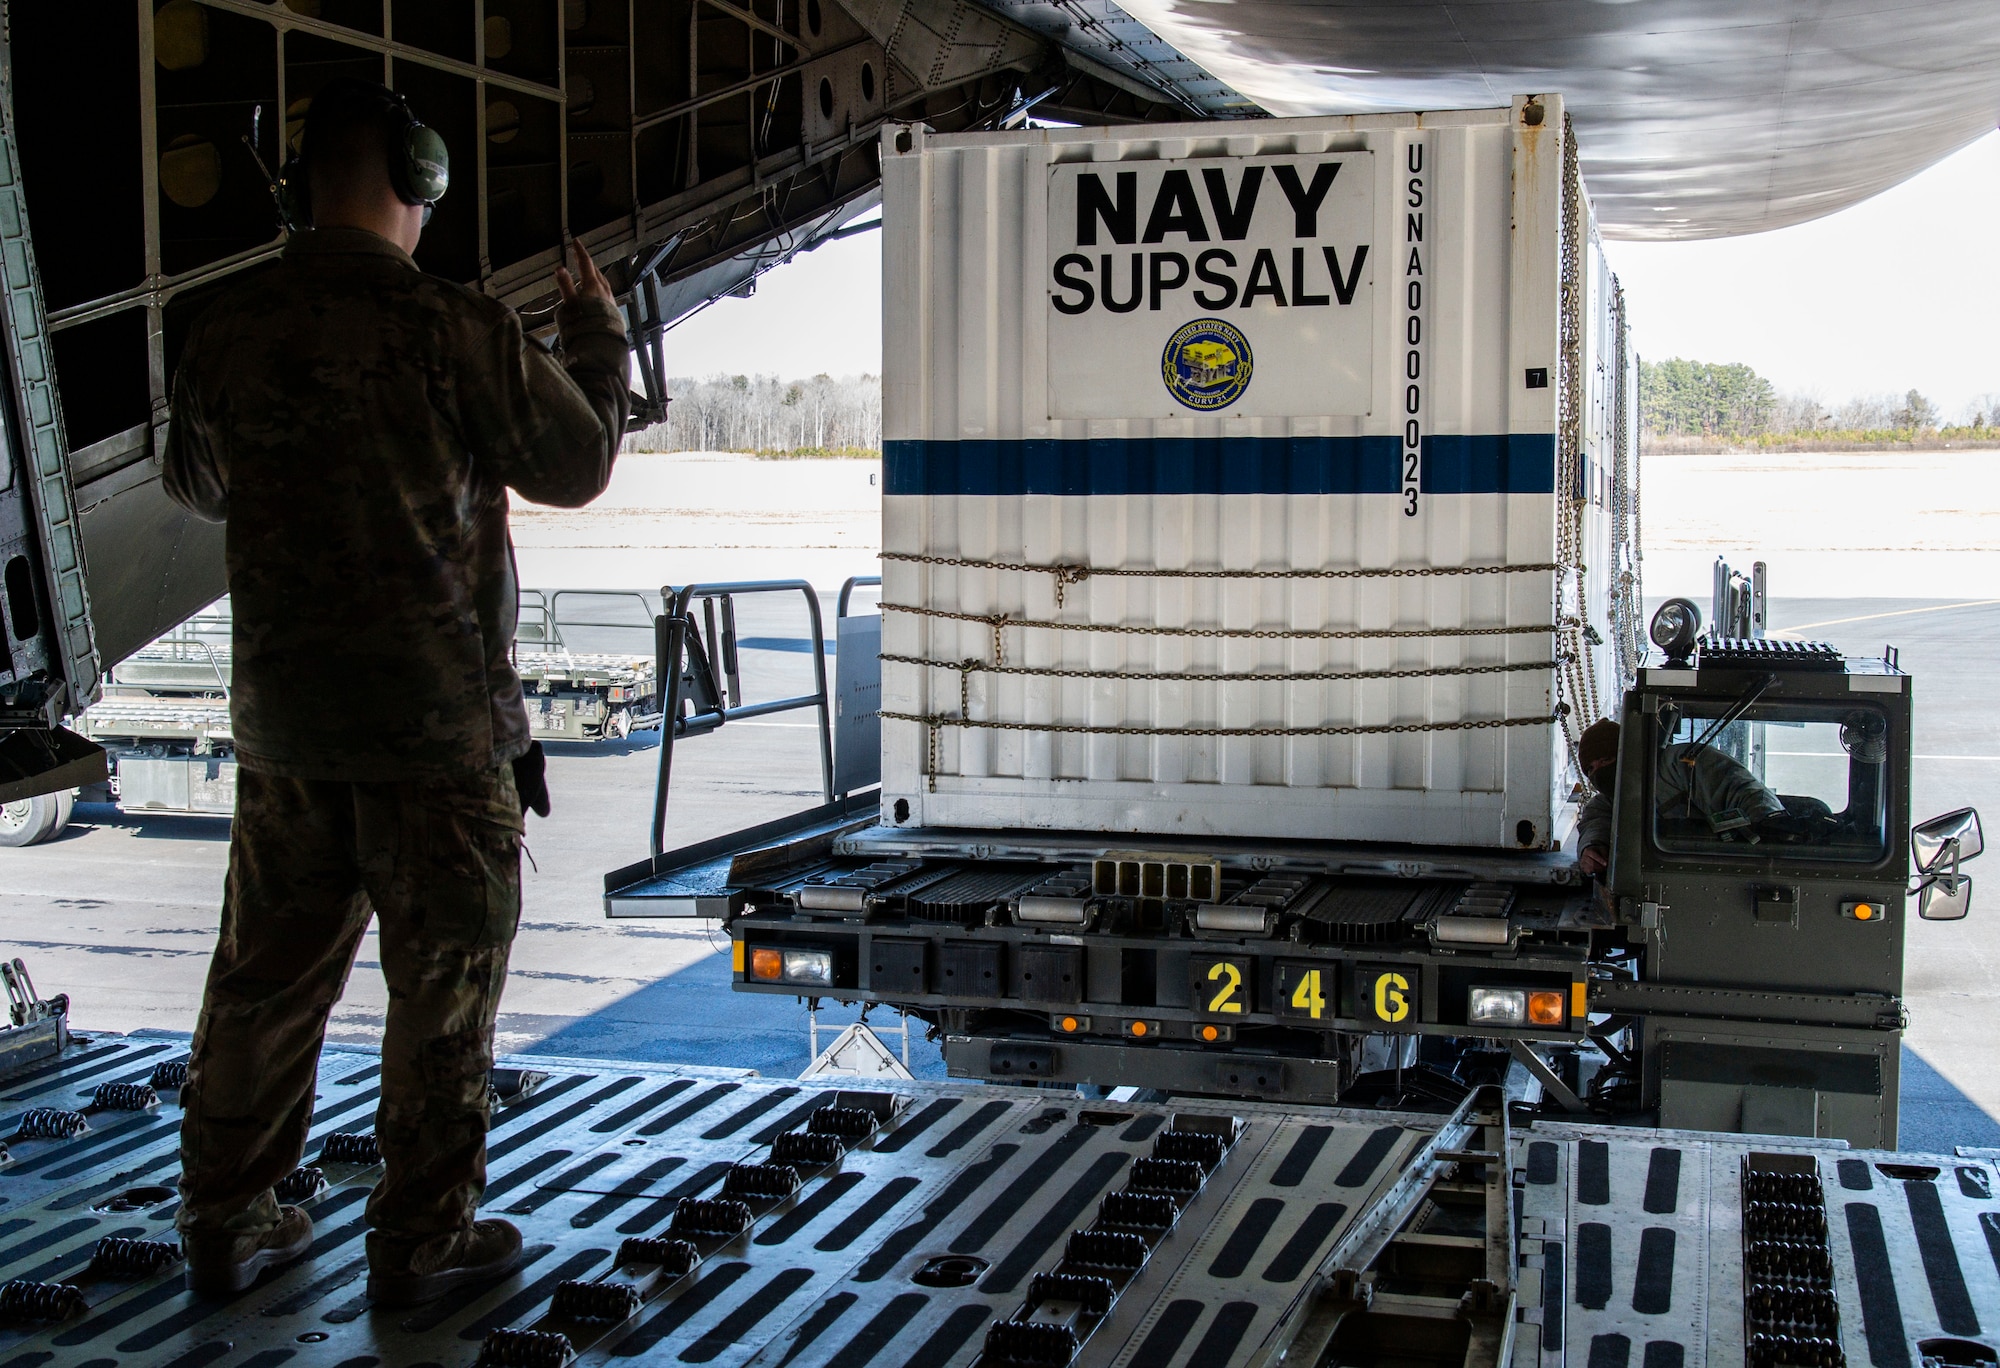 Airman 1st Class Dylan Holtzclaw, 9th Airlift Squadron loadmaster, marshals a cargo loader driven by Senior Airman Martin Riveracandelario, 436th Aerial Port Squadron ramp specialist, at the aft loading ramp of a C-5M Super Galaxy on Dover Air Force Base, Delaware, Feb. 8, 2022. The C-5M transported cargo owned by U.S. Navy Supervisor of Salvage and Diving (SUPSALV), Naval Sea Systems Command. (U.S. Air Force photo by Roland Balik)